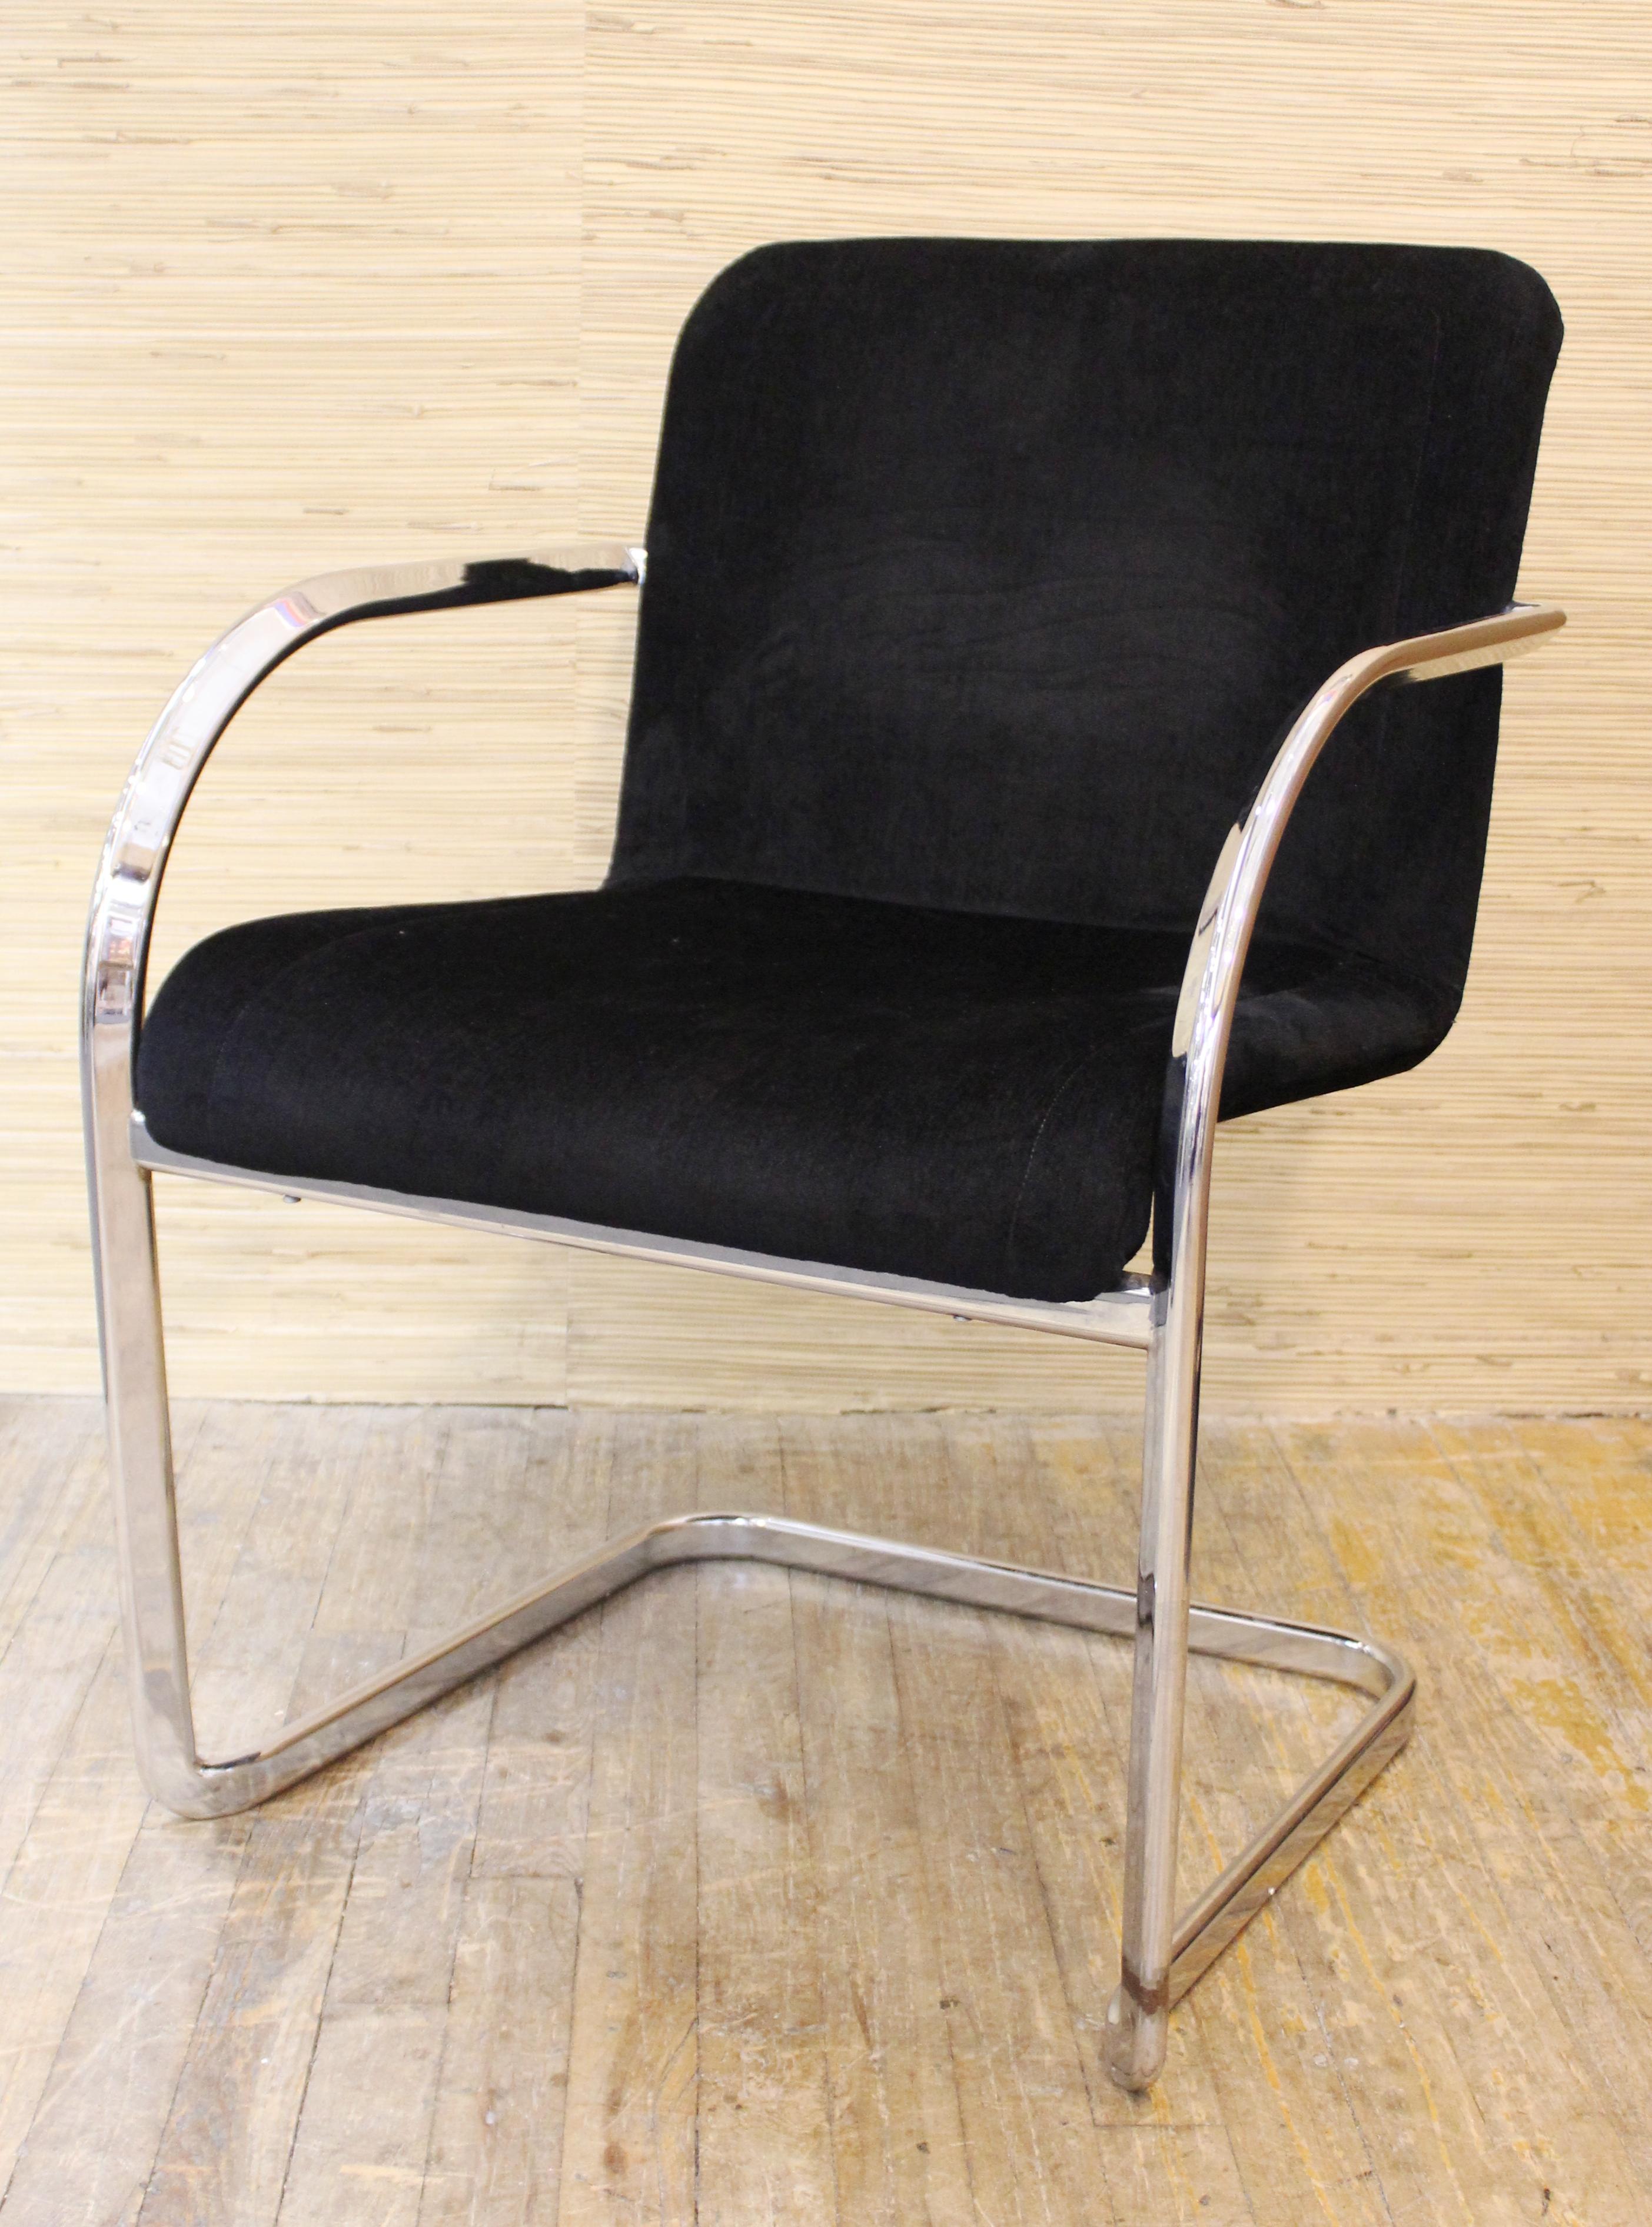 Modern set of four dining chairs with armrests in chromed metal structure with upholstery, designed by Cassina during the 1970s. The set is in great vintage condition with age-appropriate wear.